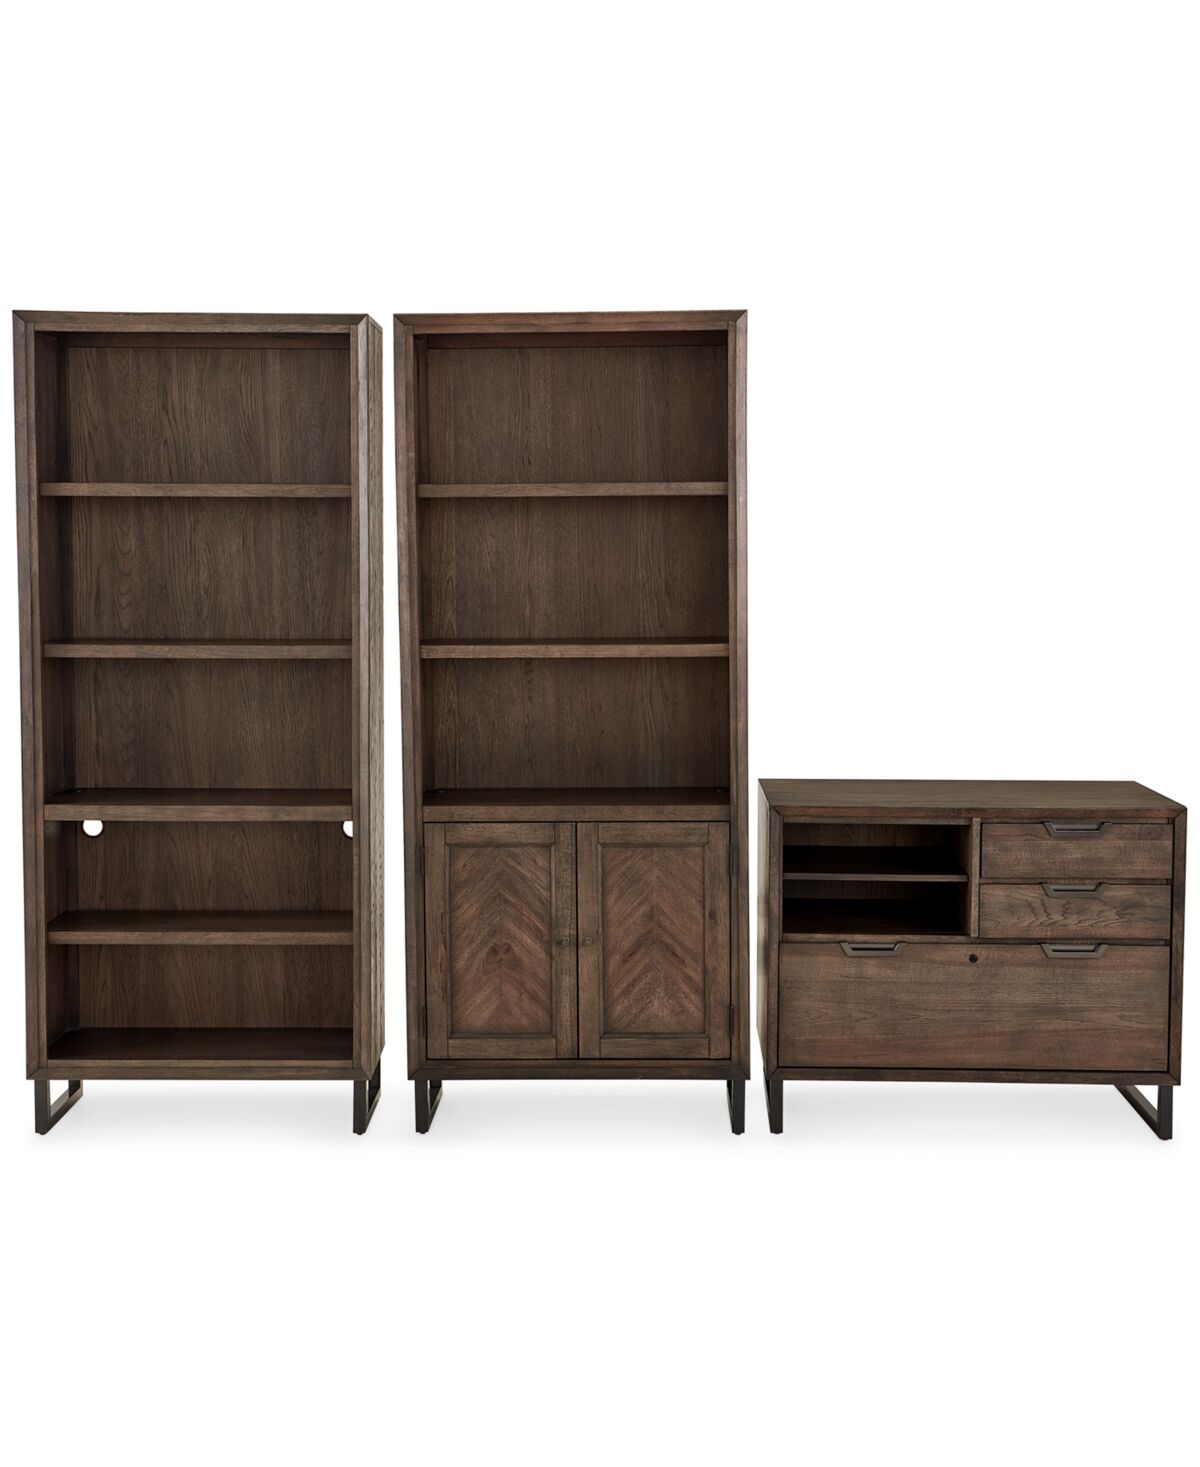 Furniture Gidian Home Office, 3-Pc. Set (Combo File, Open Bookcase, Door Bookcase) - Fossil